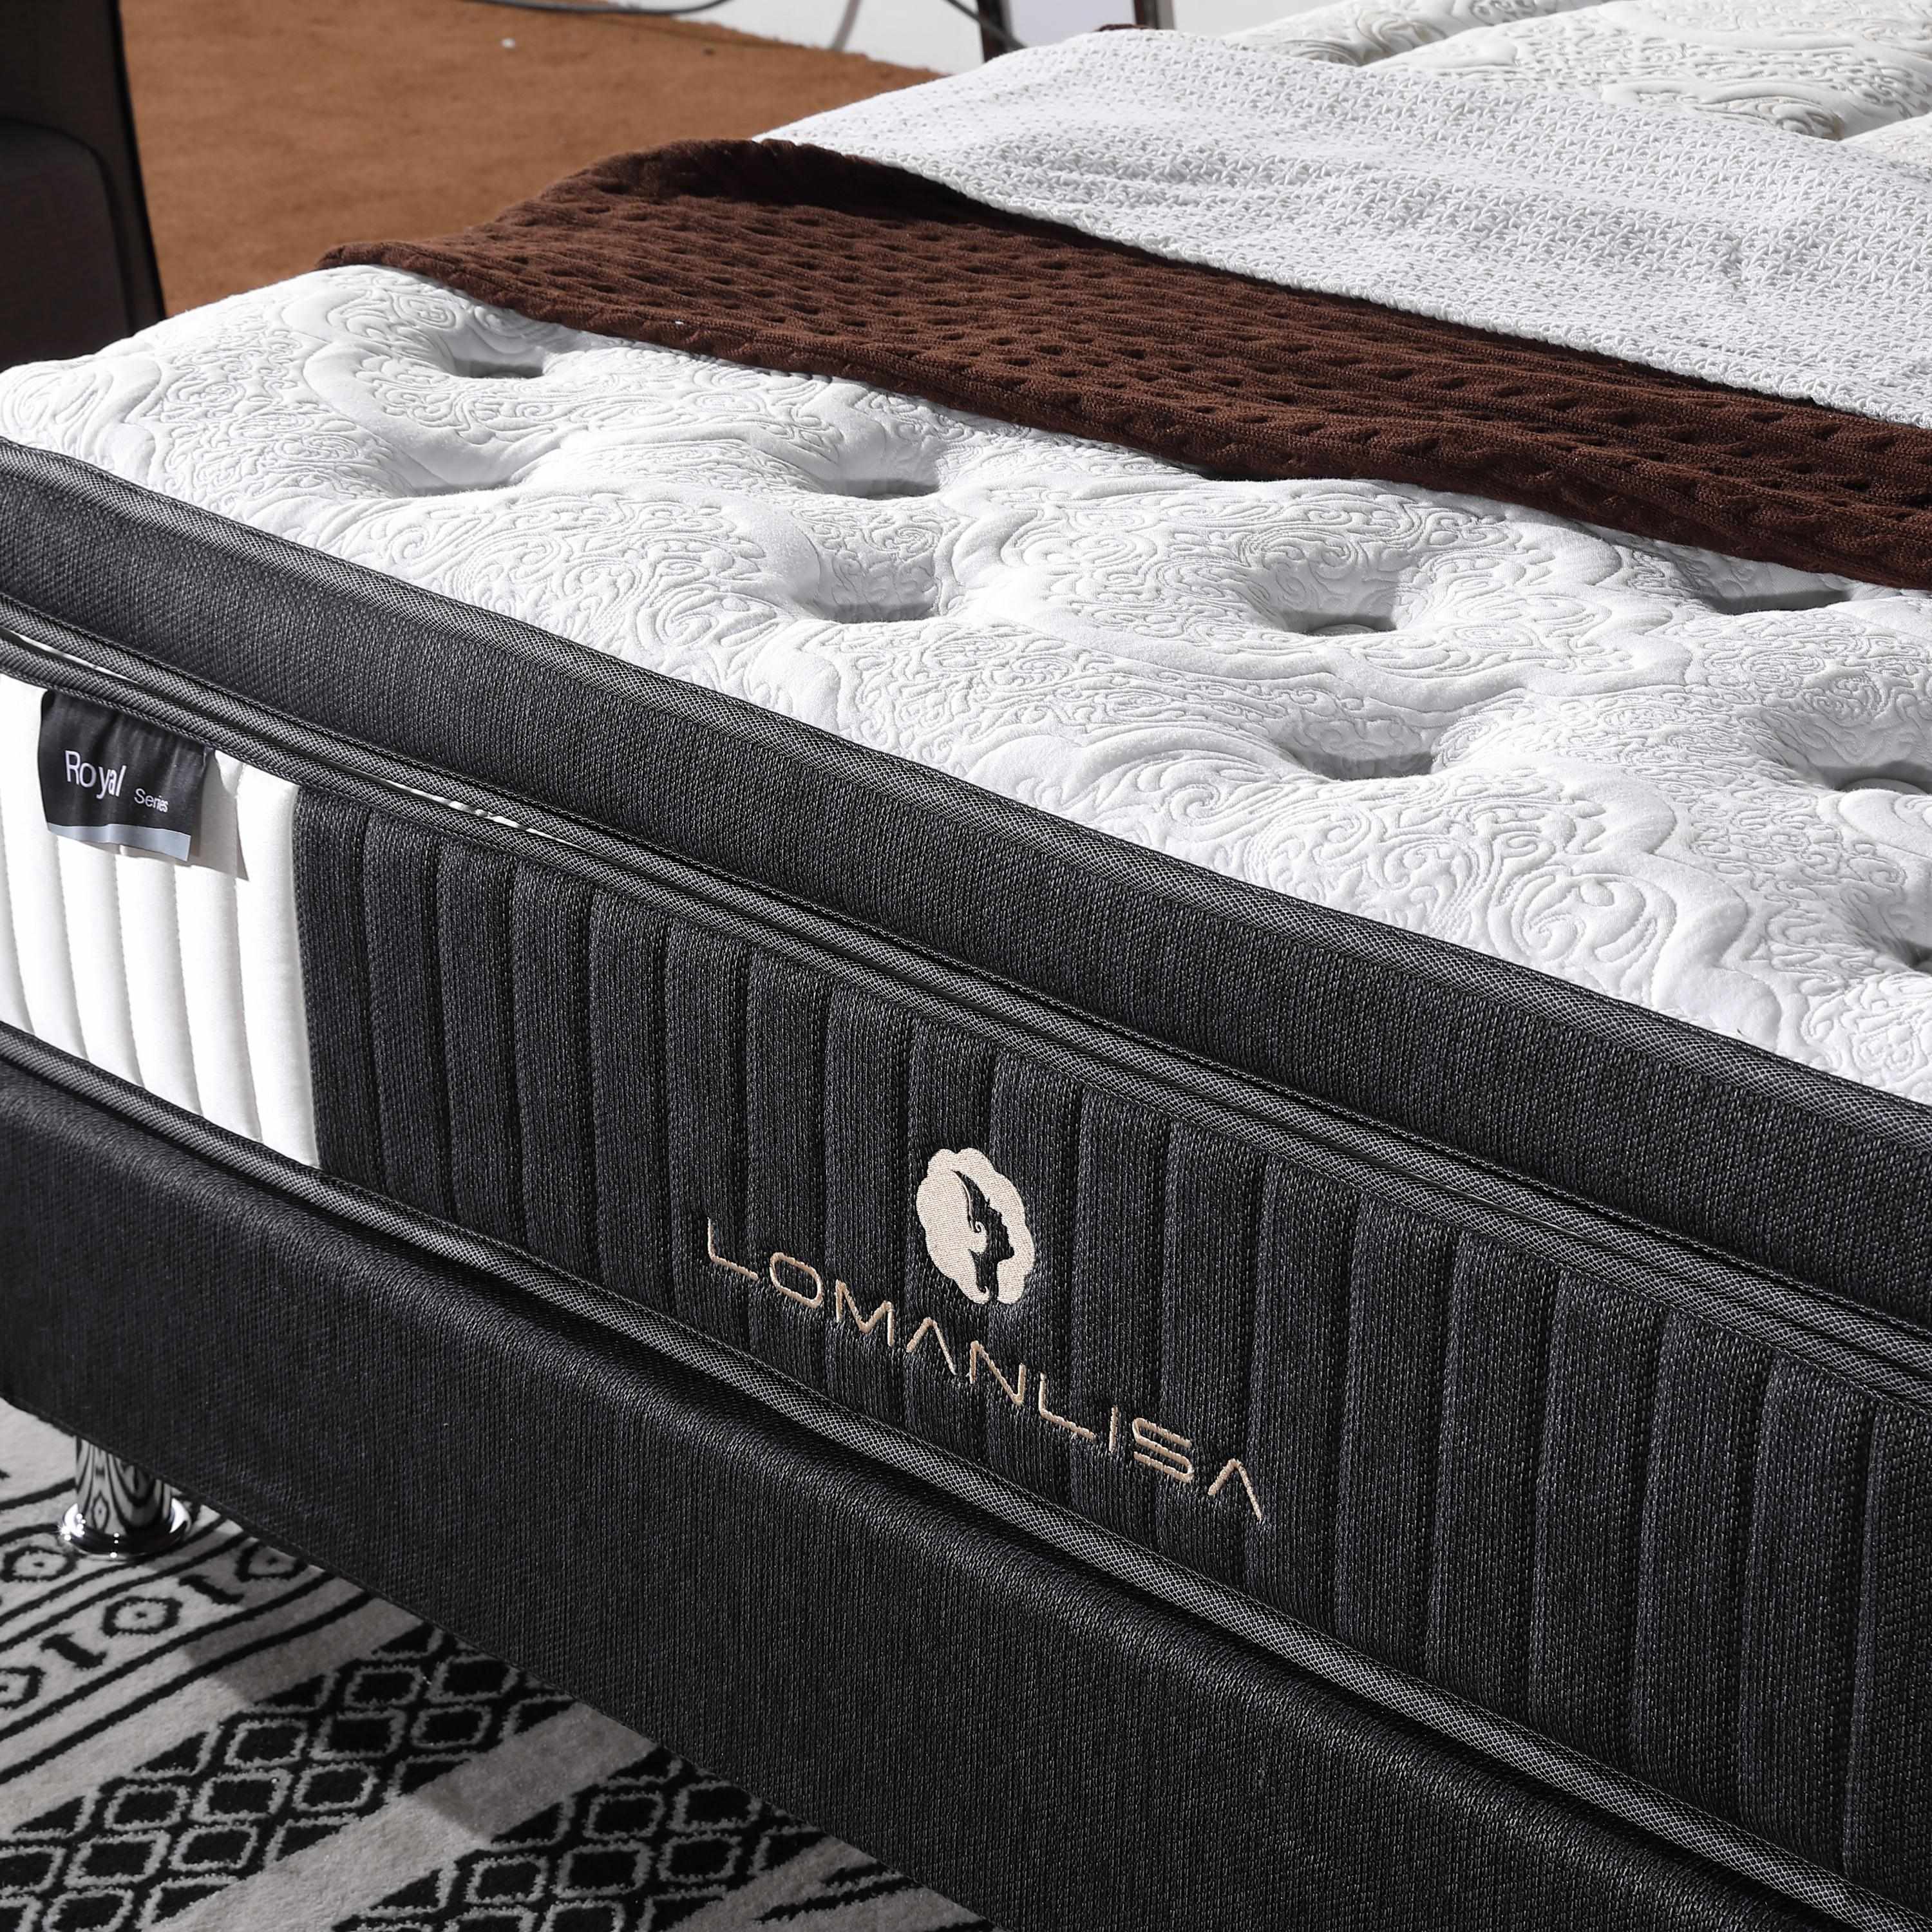 JLH best full roll up mattress cost for guesthouse